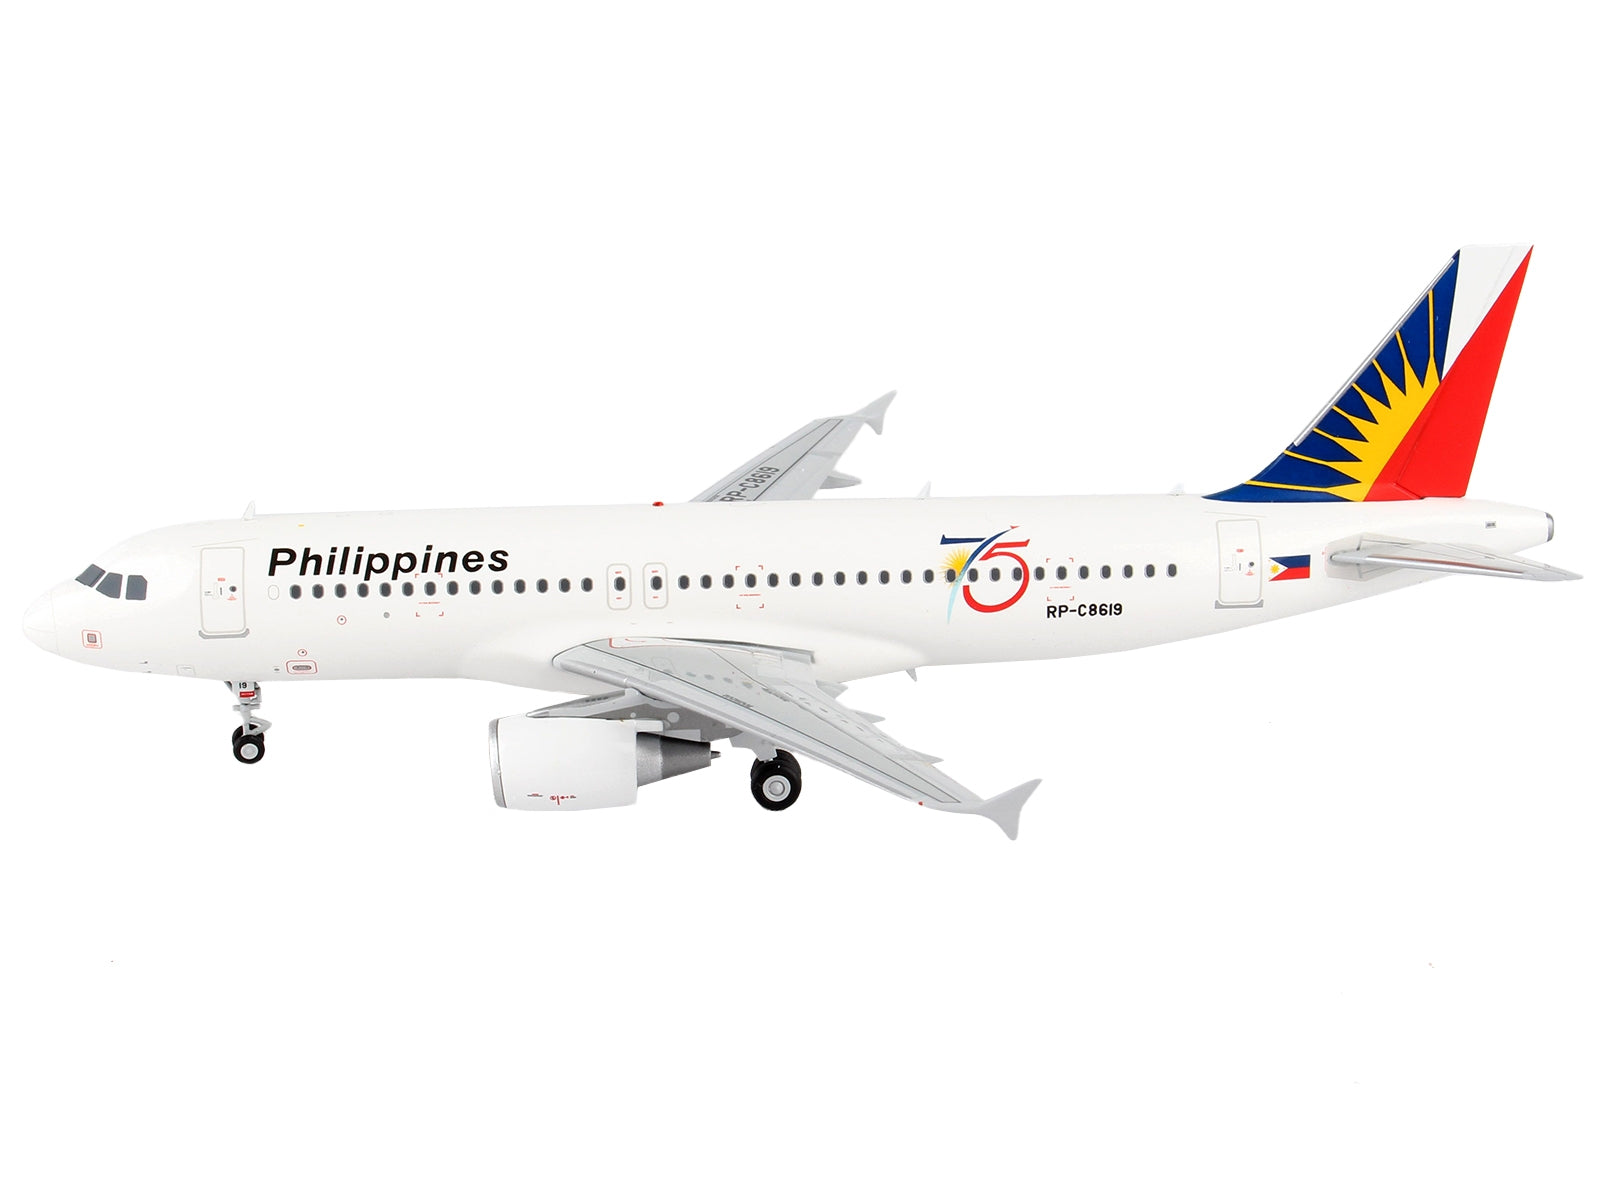 Airbus A320 Commercial Aircraft "Philippine Airlines - 75th Anniversary" White with Tail Graphics